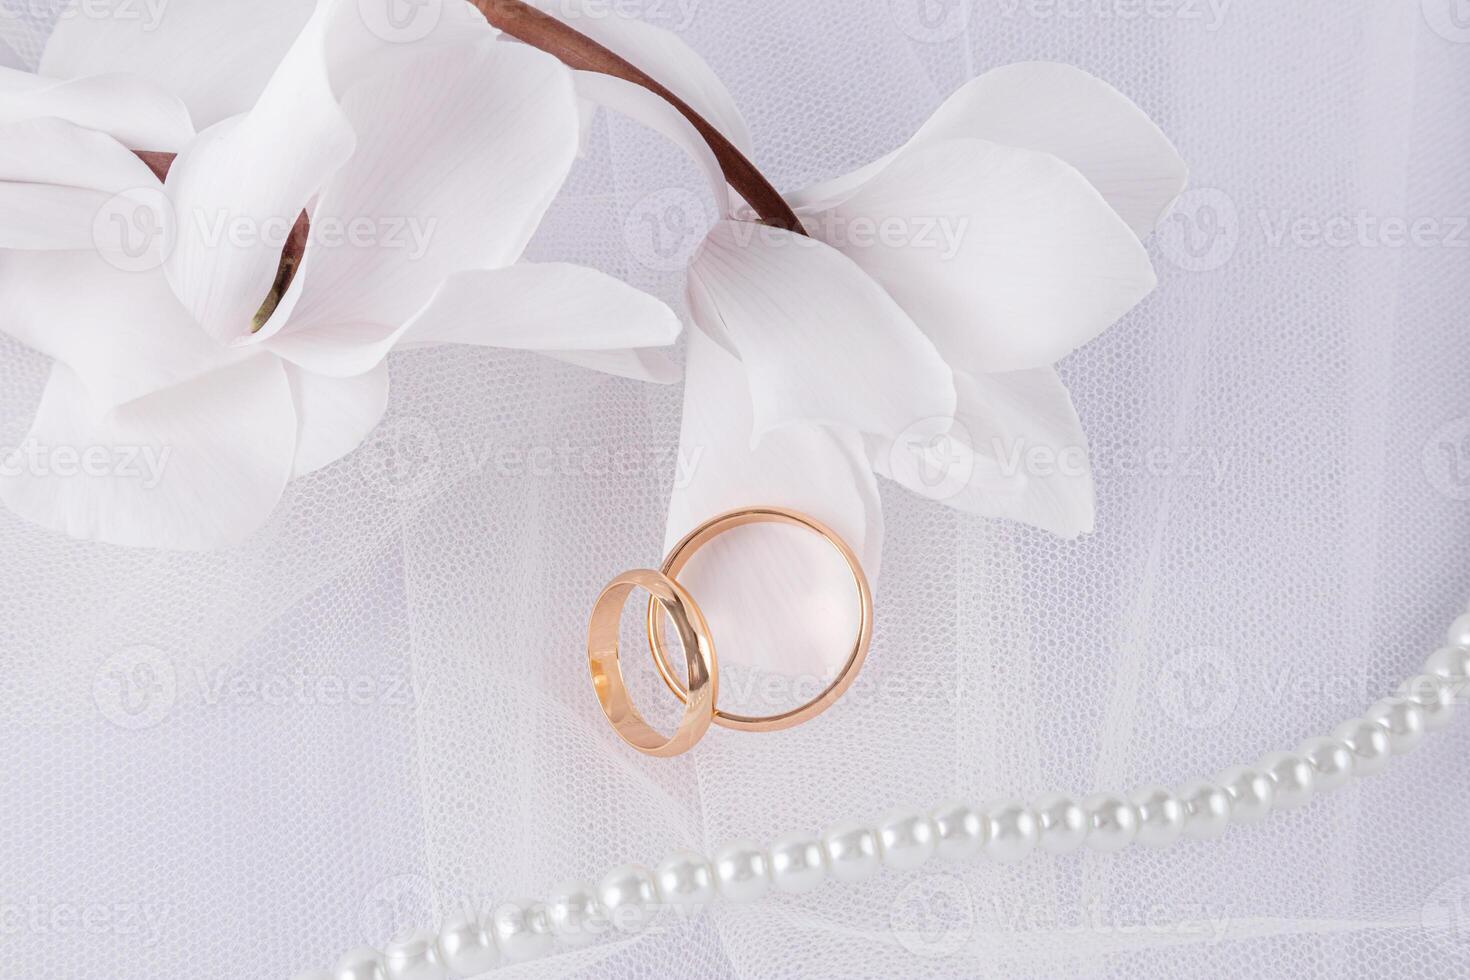 Beautiful wedding background in white color with delicate white flowers and gold wedding rings. Veil of the bride, pearl beads. Top view. photo